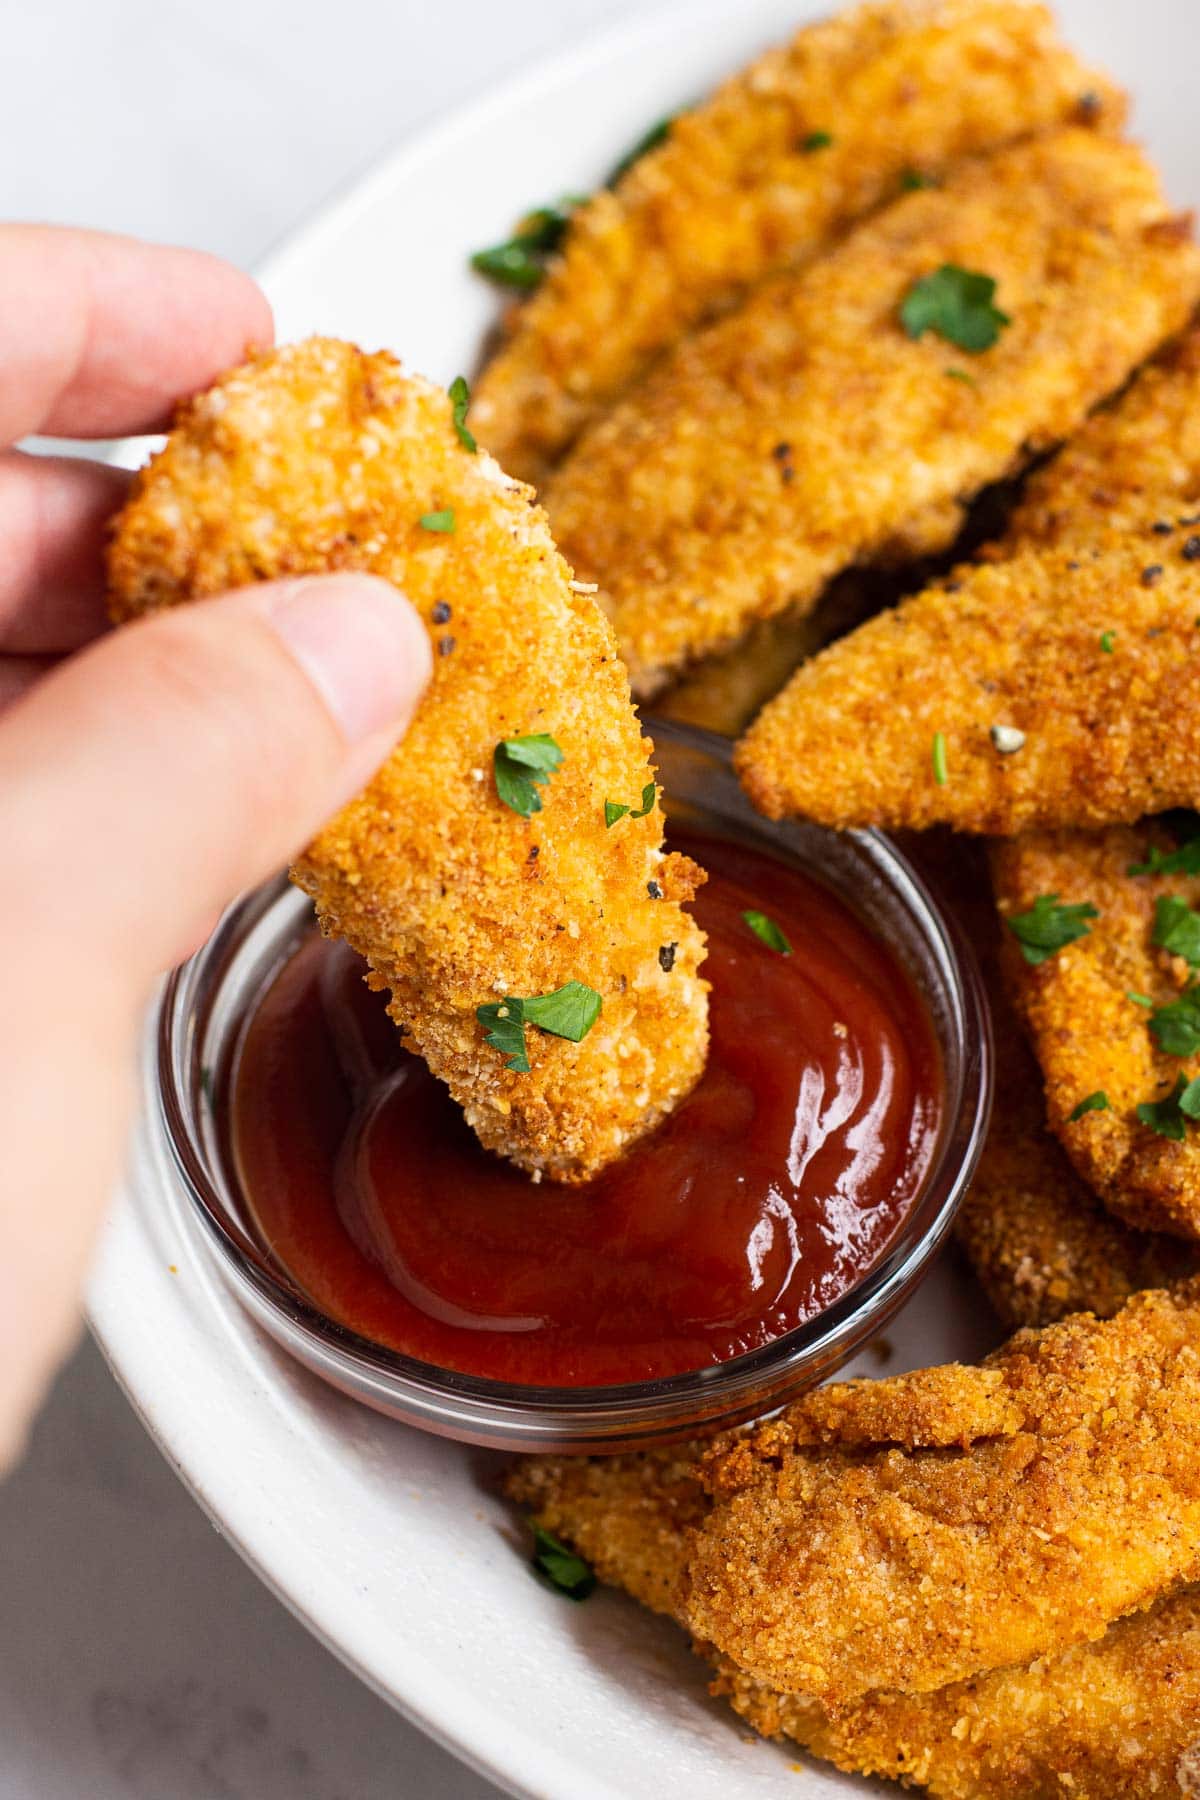 Dipping air fryer chicken tenders into ketchup.